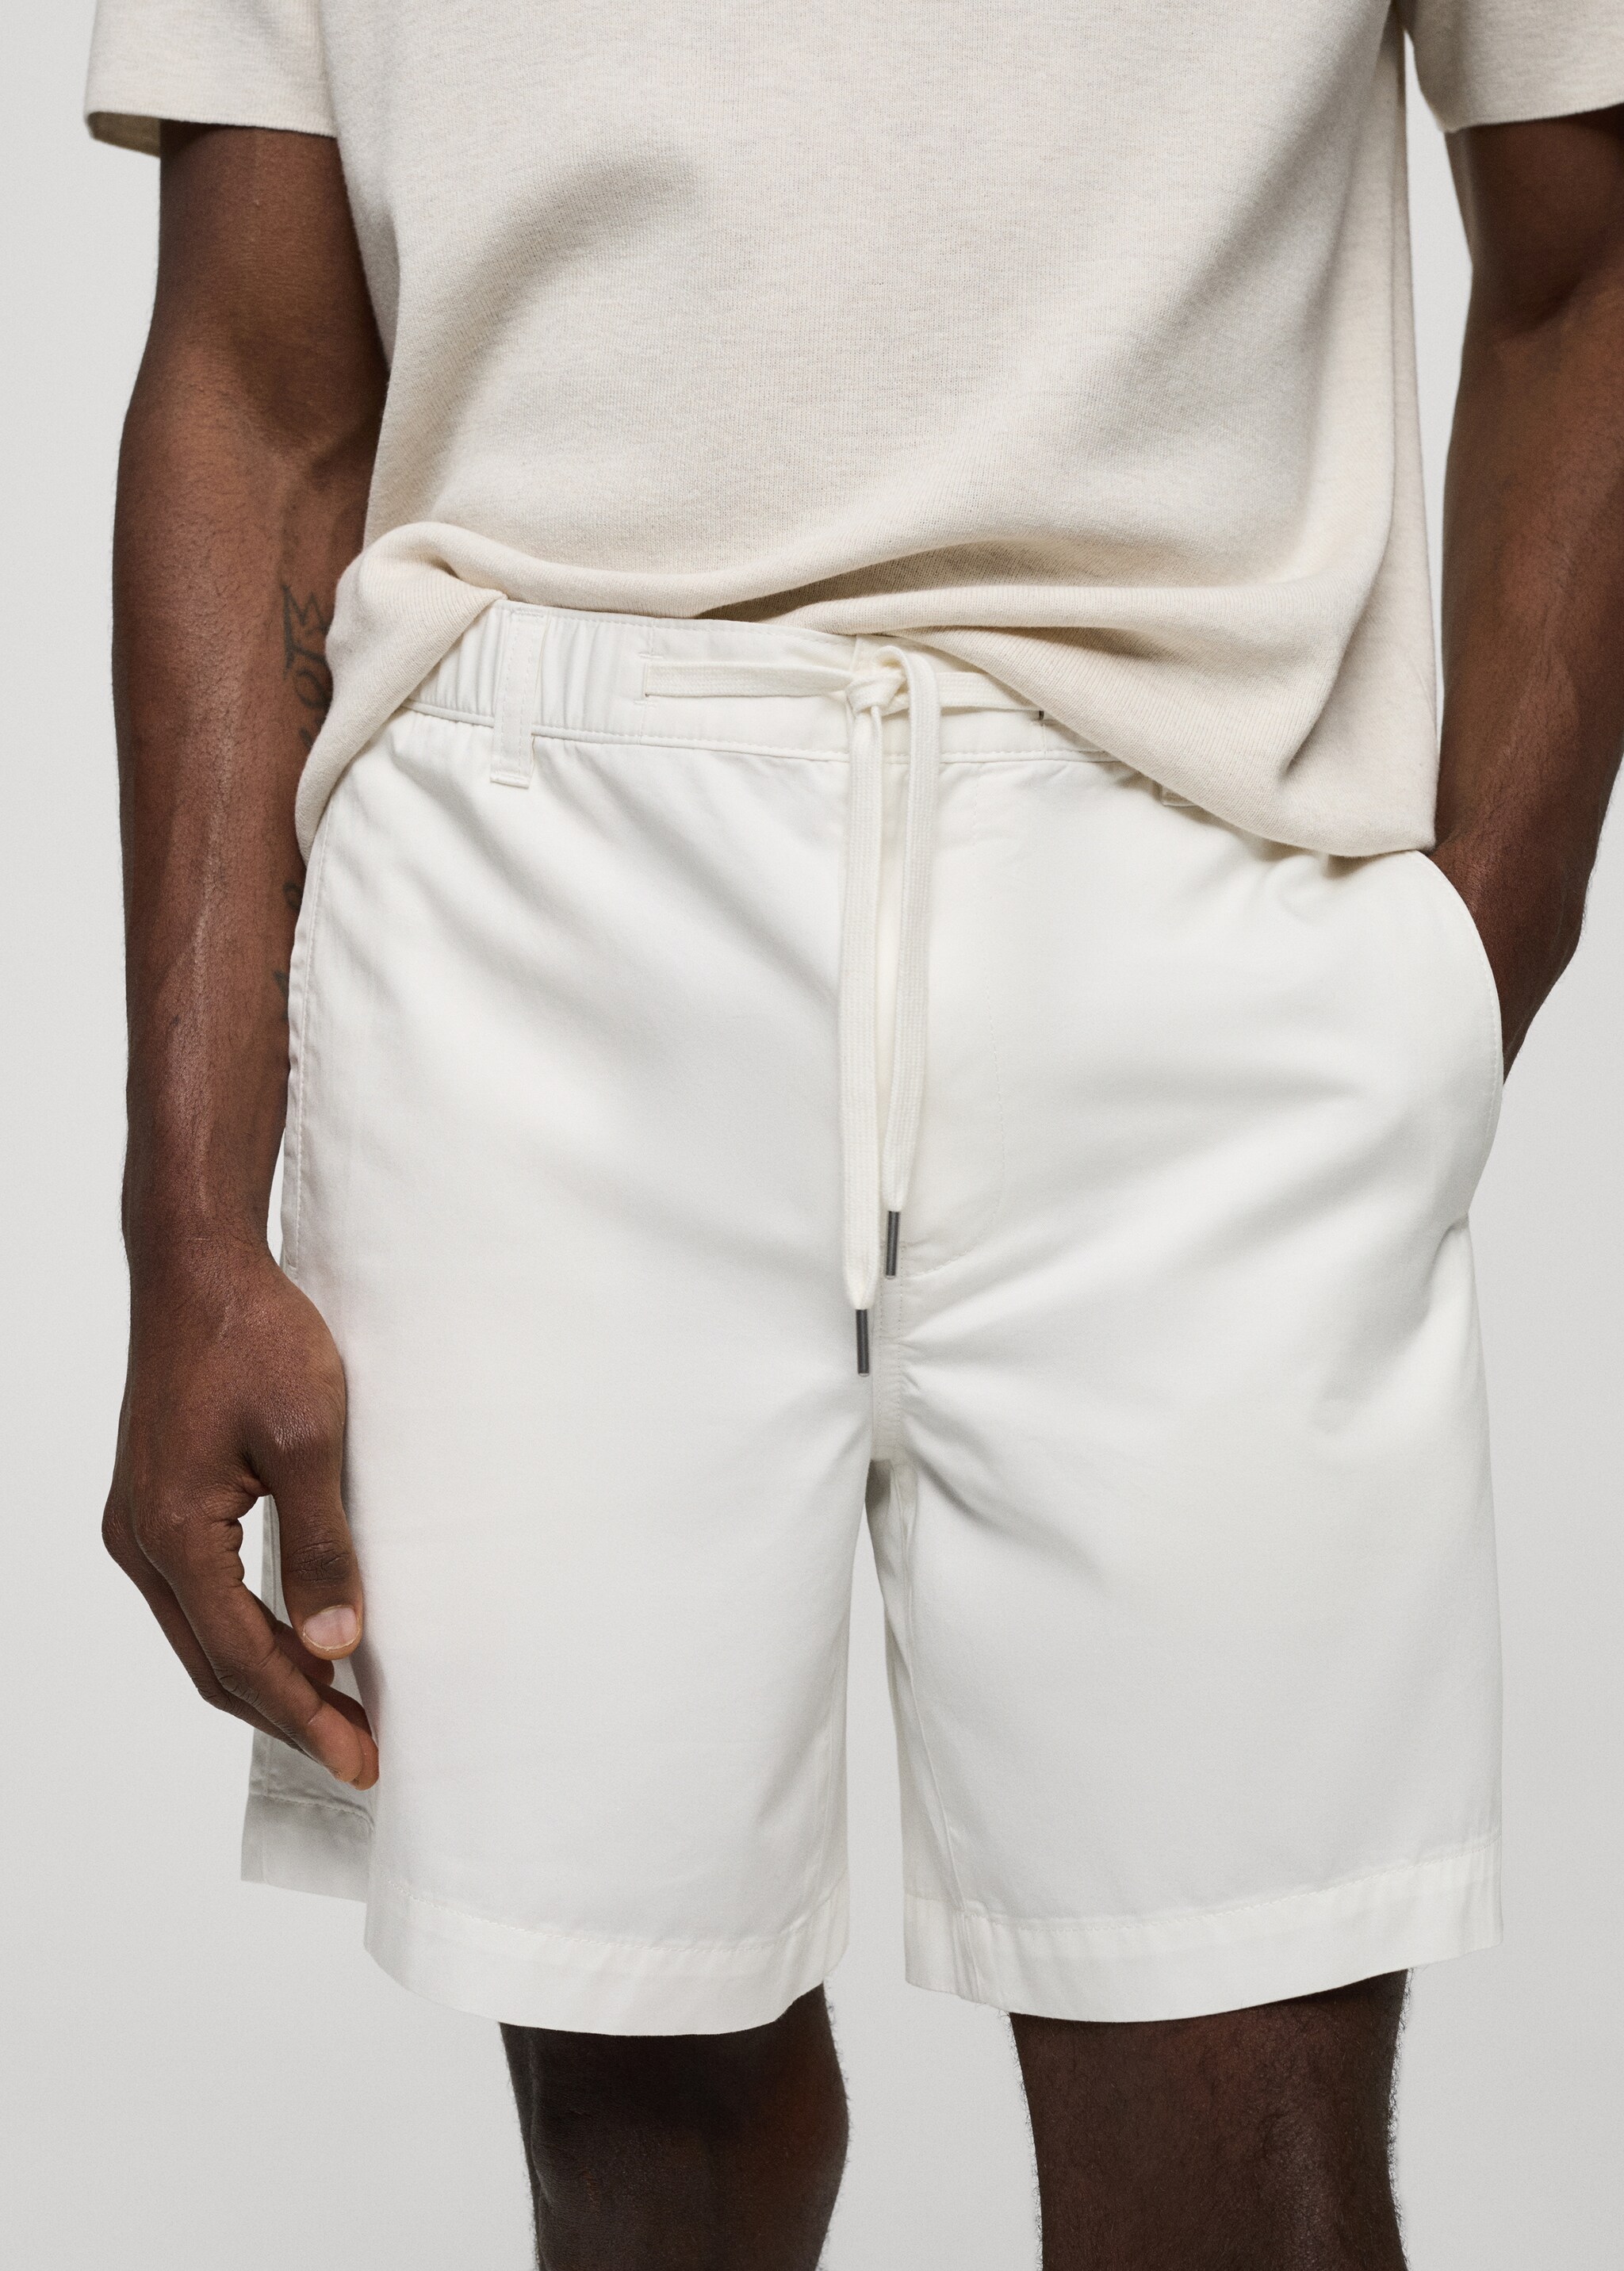 100% cotton drawstring Bermuda shorts - Details of the article 1